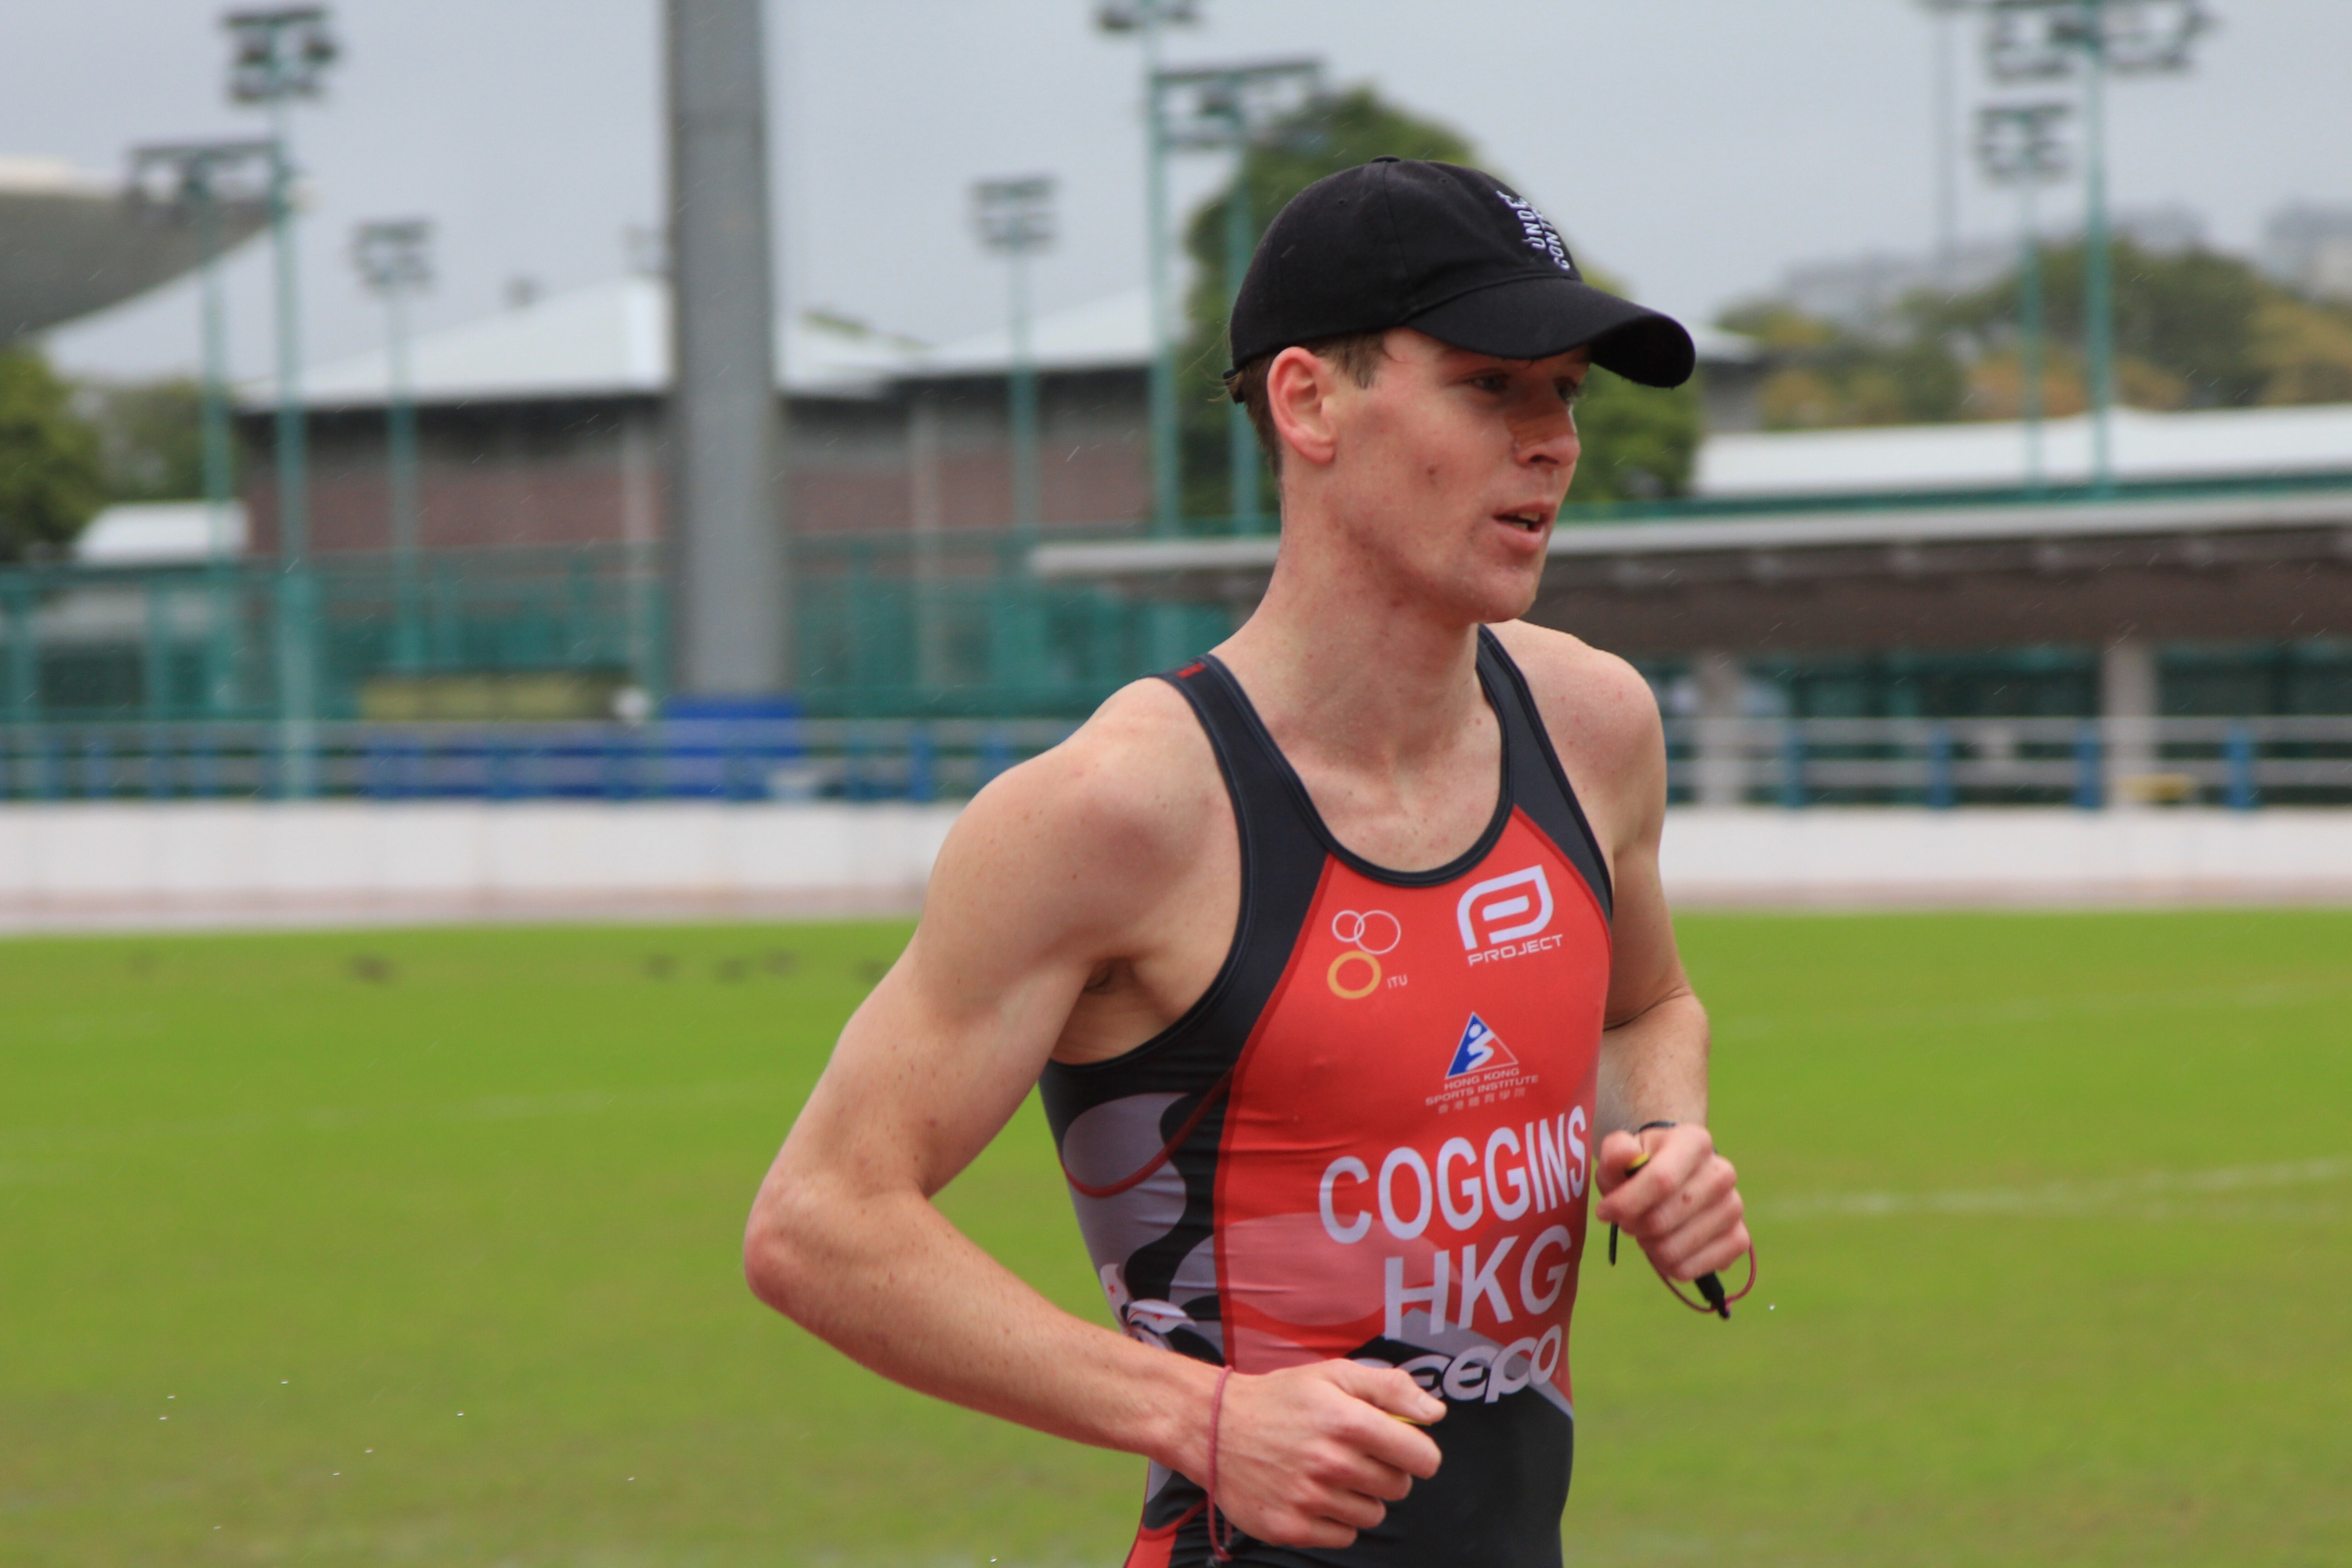 Hong Kong triathlete Oscar Coggins said he is primed and ready for the Tokyo Olympics. Photo: Handout